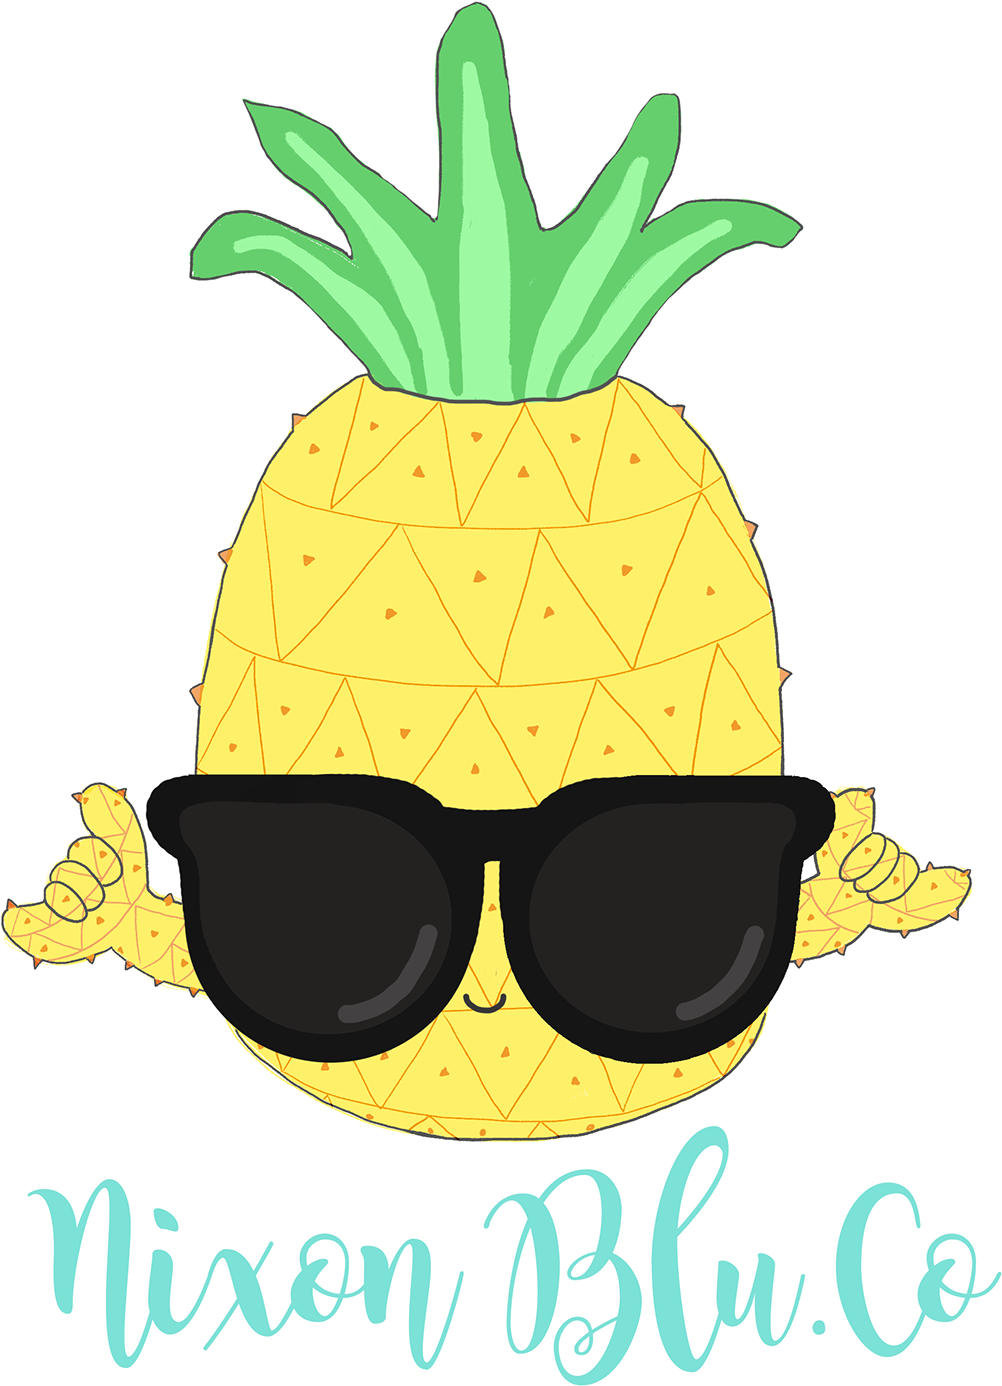 Logo Design For A Small Online Boutique Called Nixon - Pineapple (1200x1566)